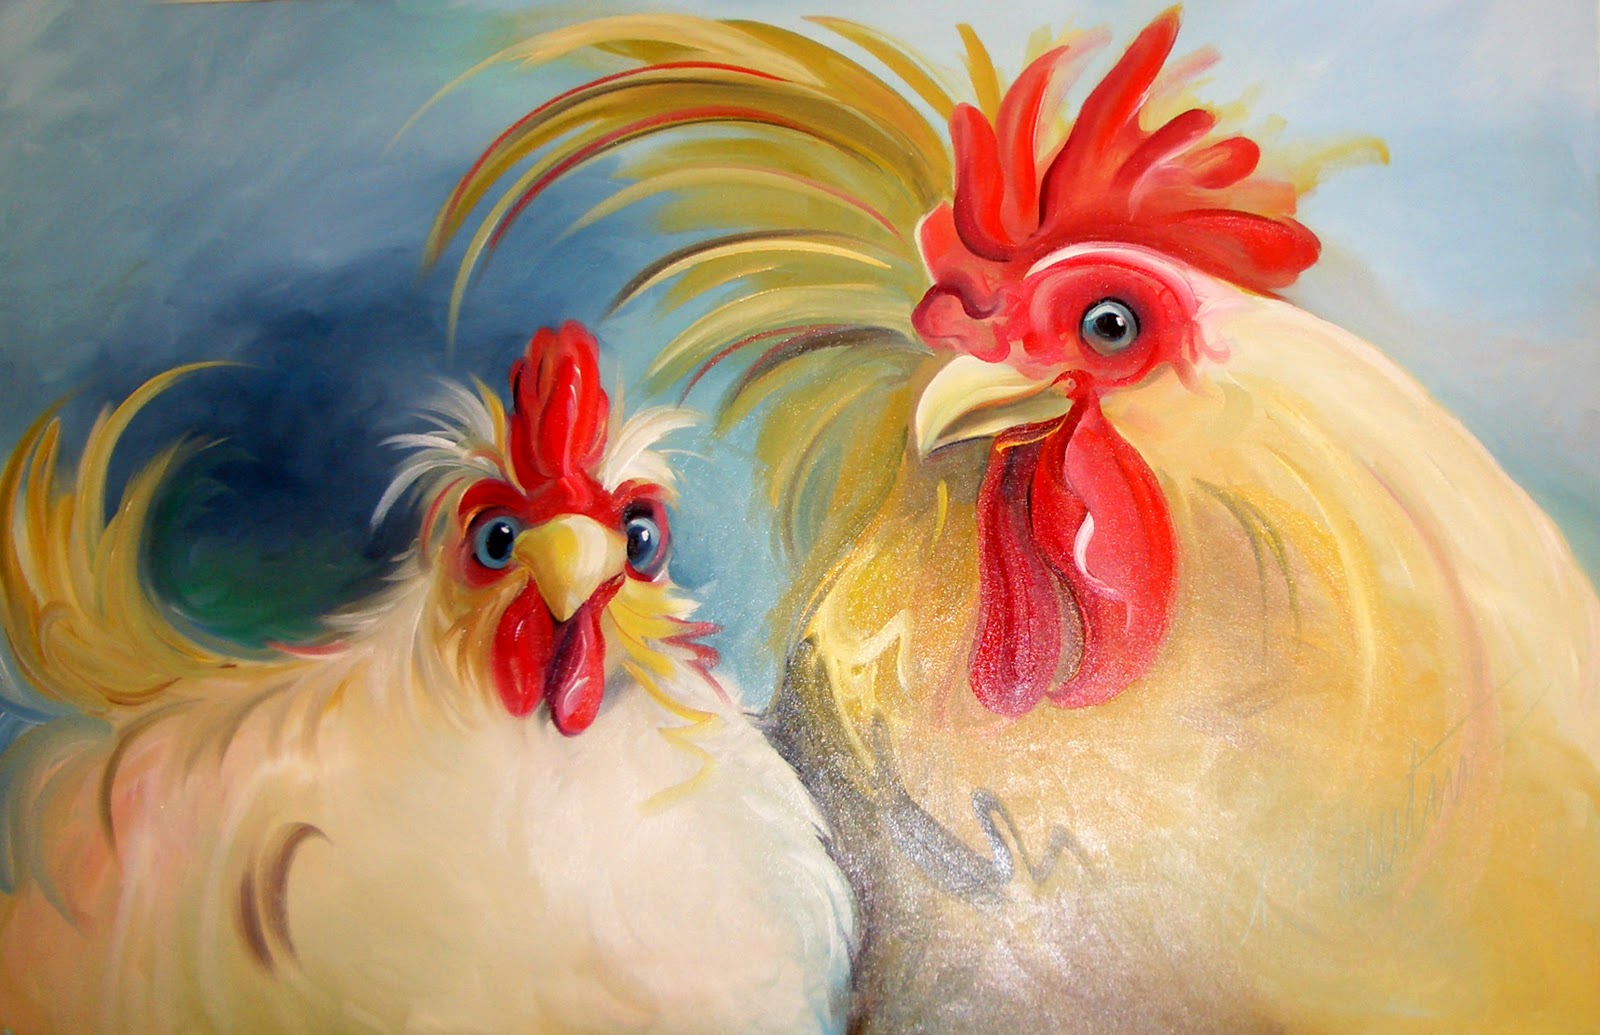 Amy Hautman Paintings: "We're Golden", Chicken Pair, Oil Painting